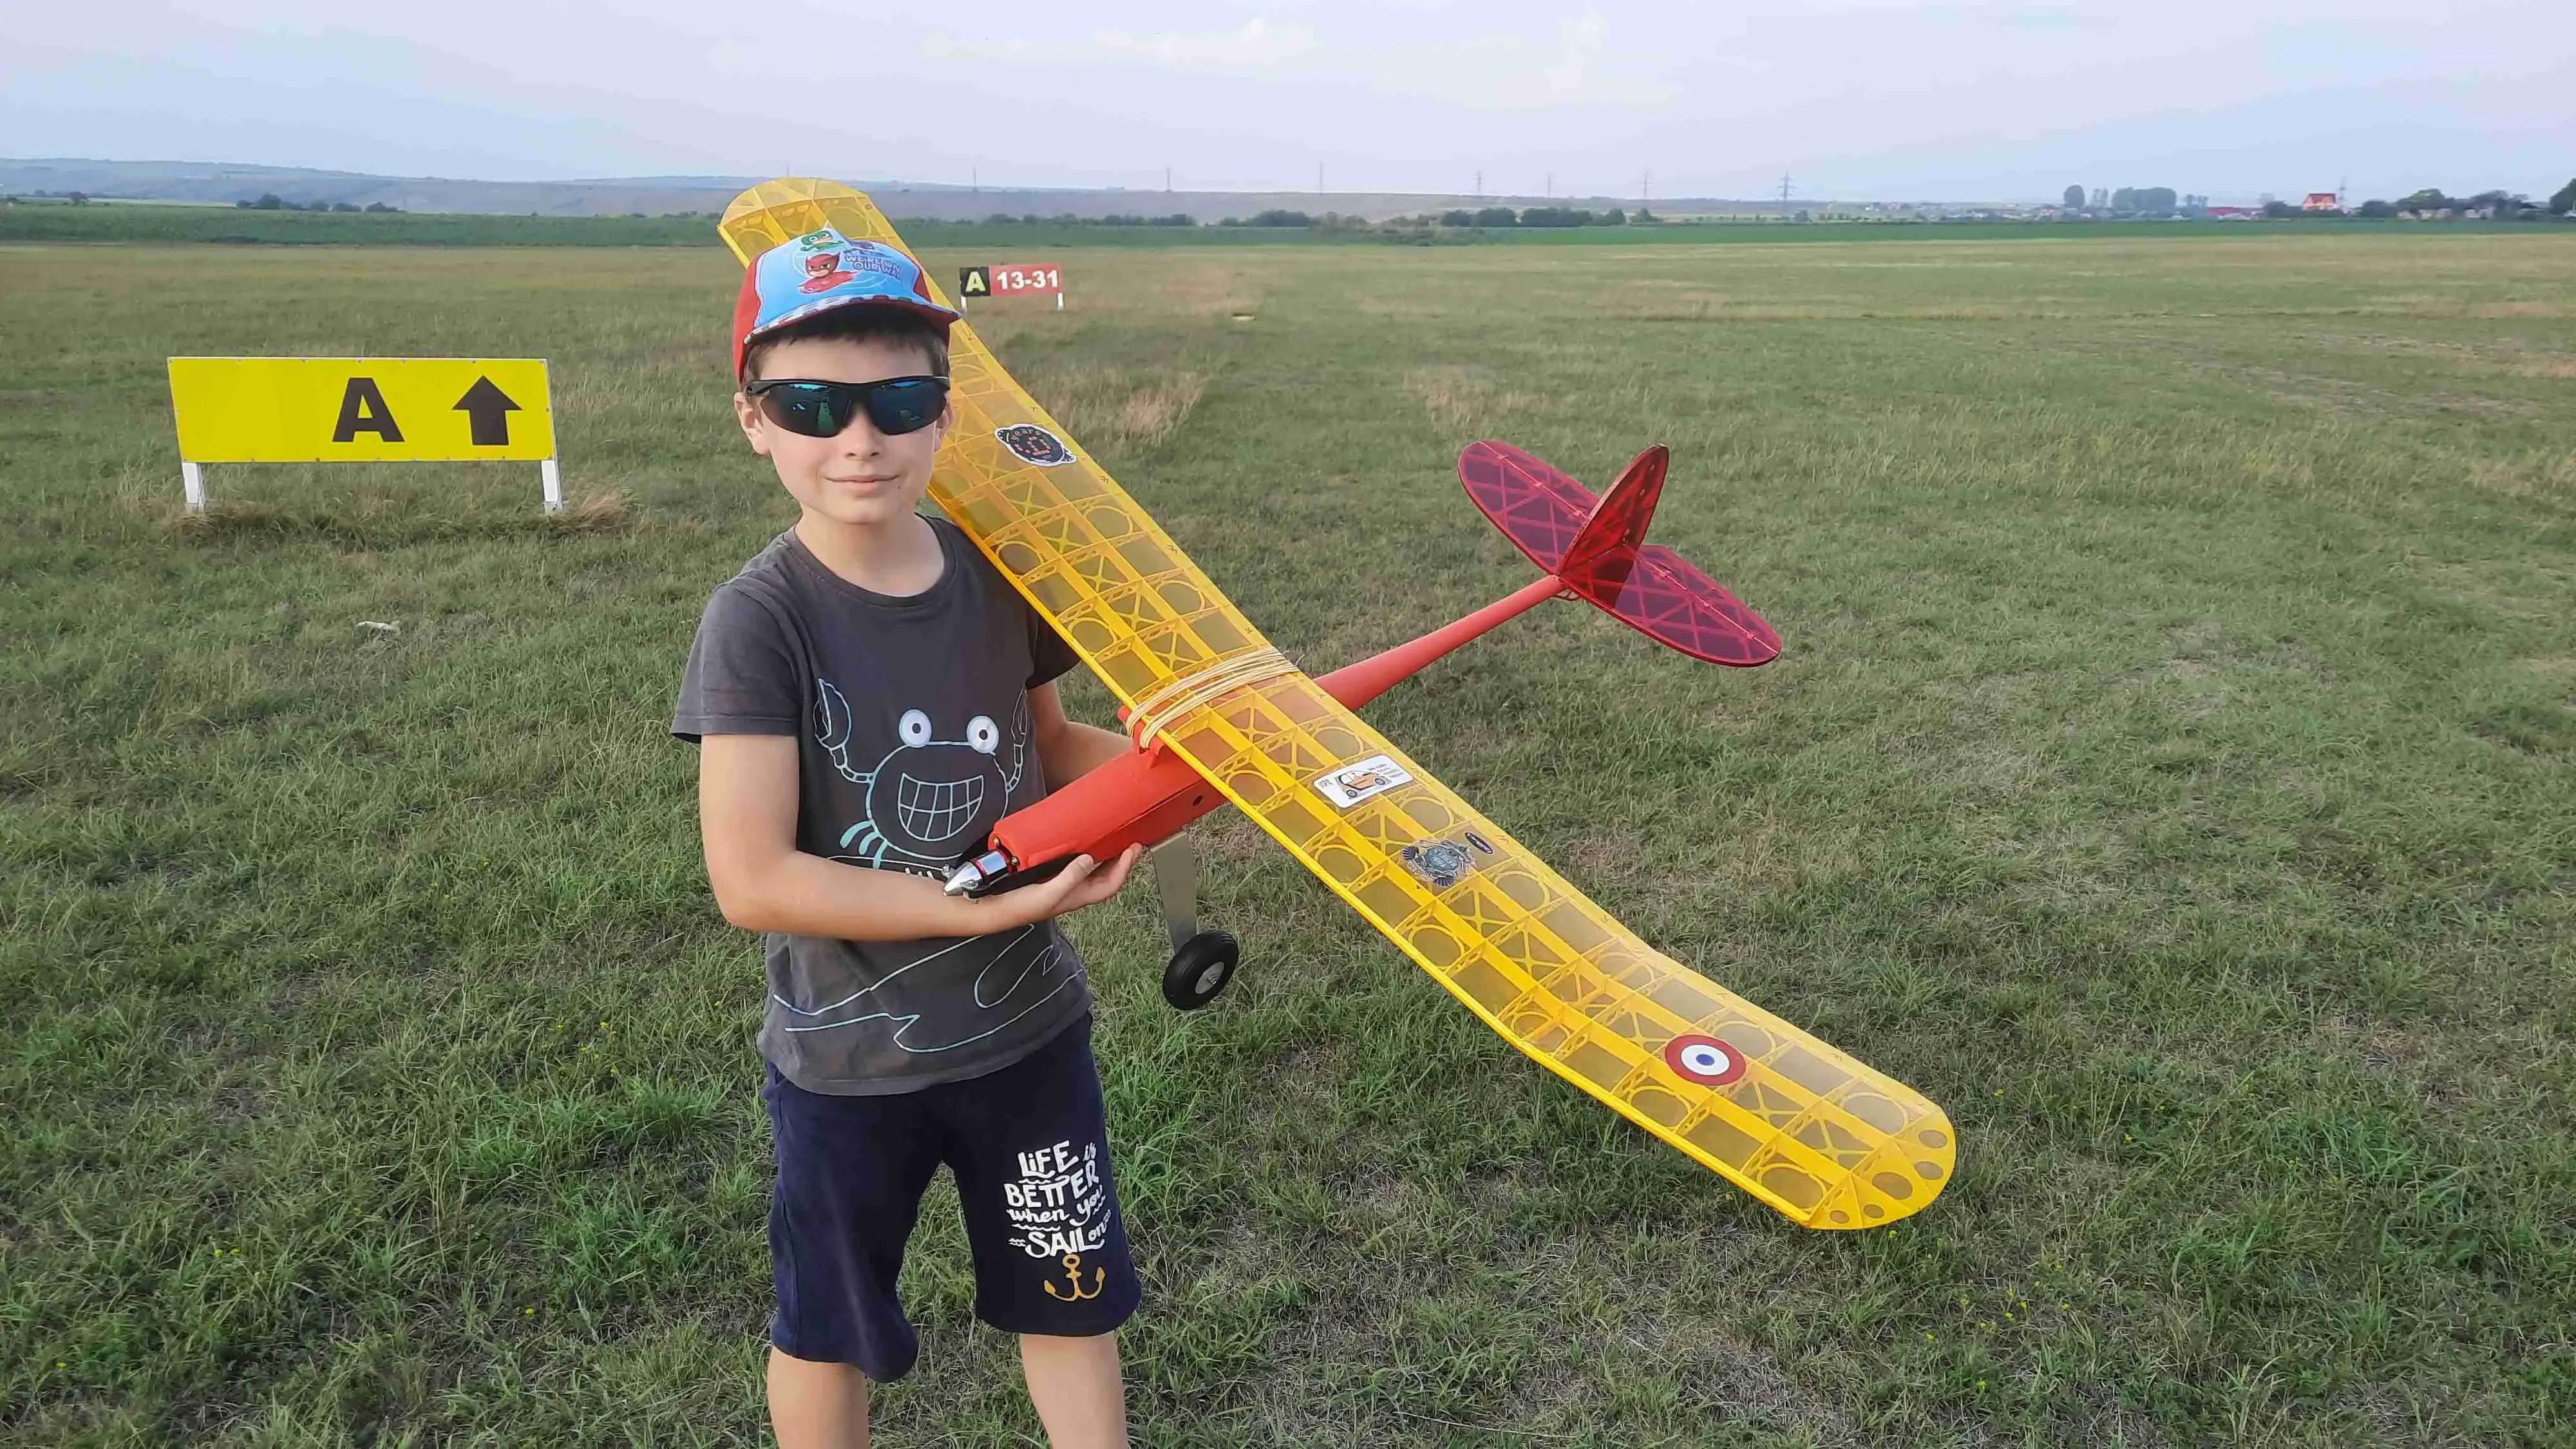 Best beginner airplane (fun to build and fly)